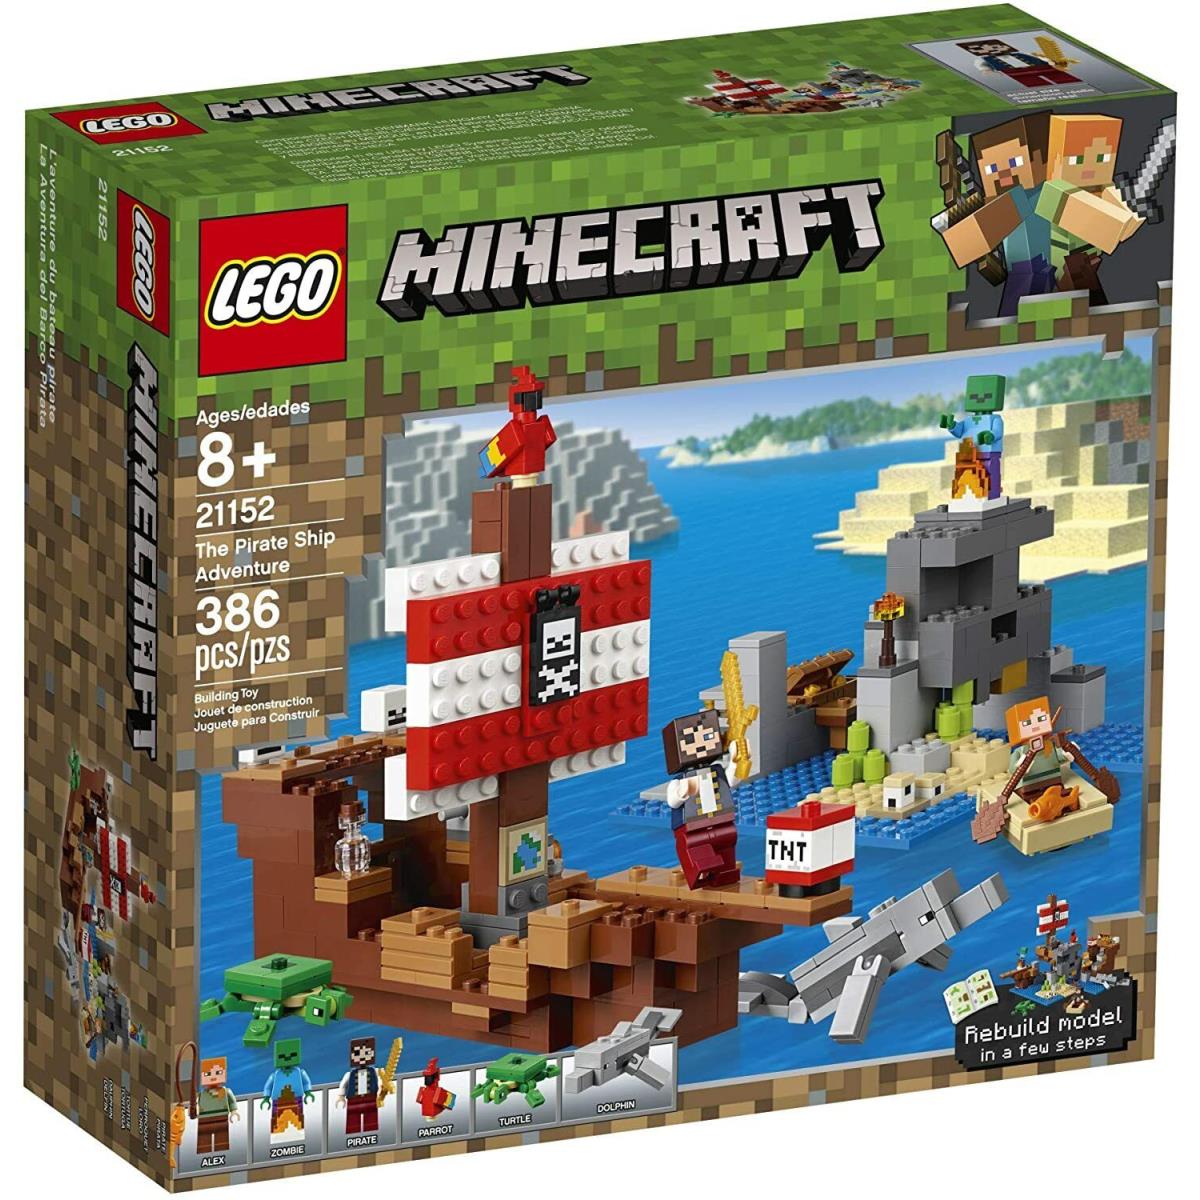 Lego Minecraft The Pirate Ship Adventure 21152 Building Kit 386 Pieces Misb